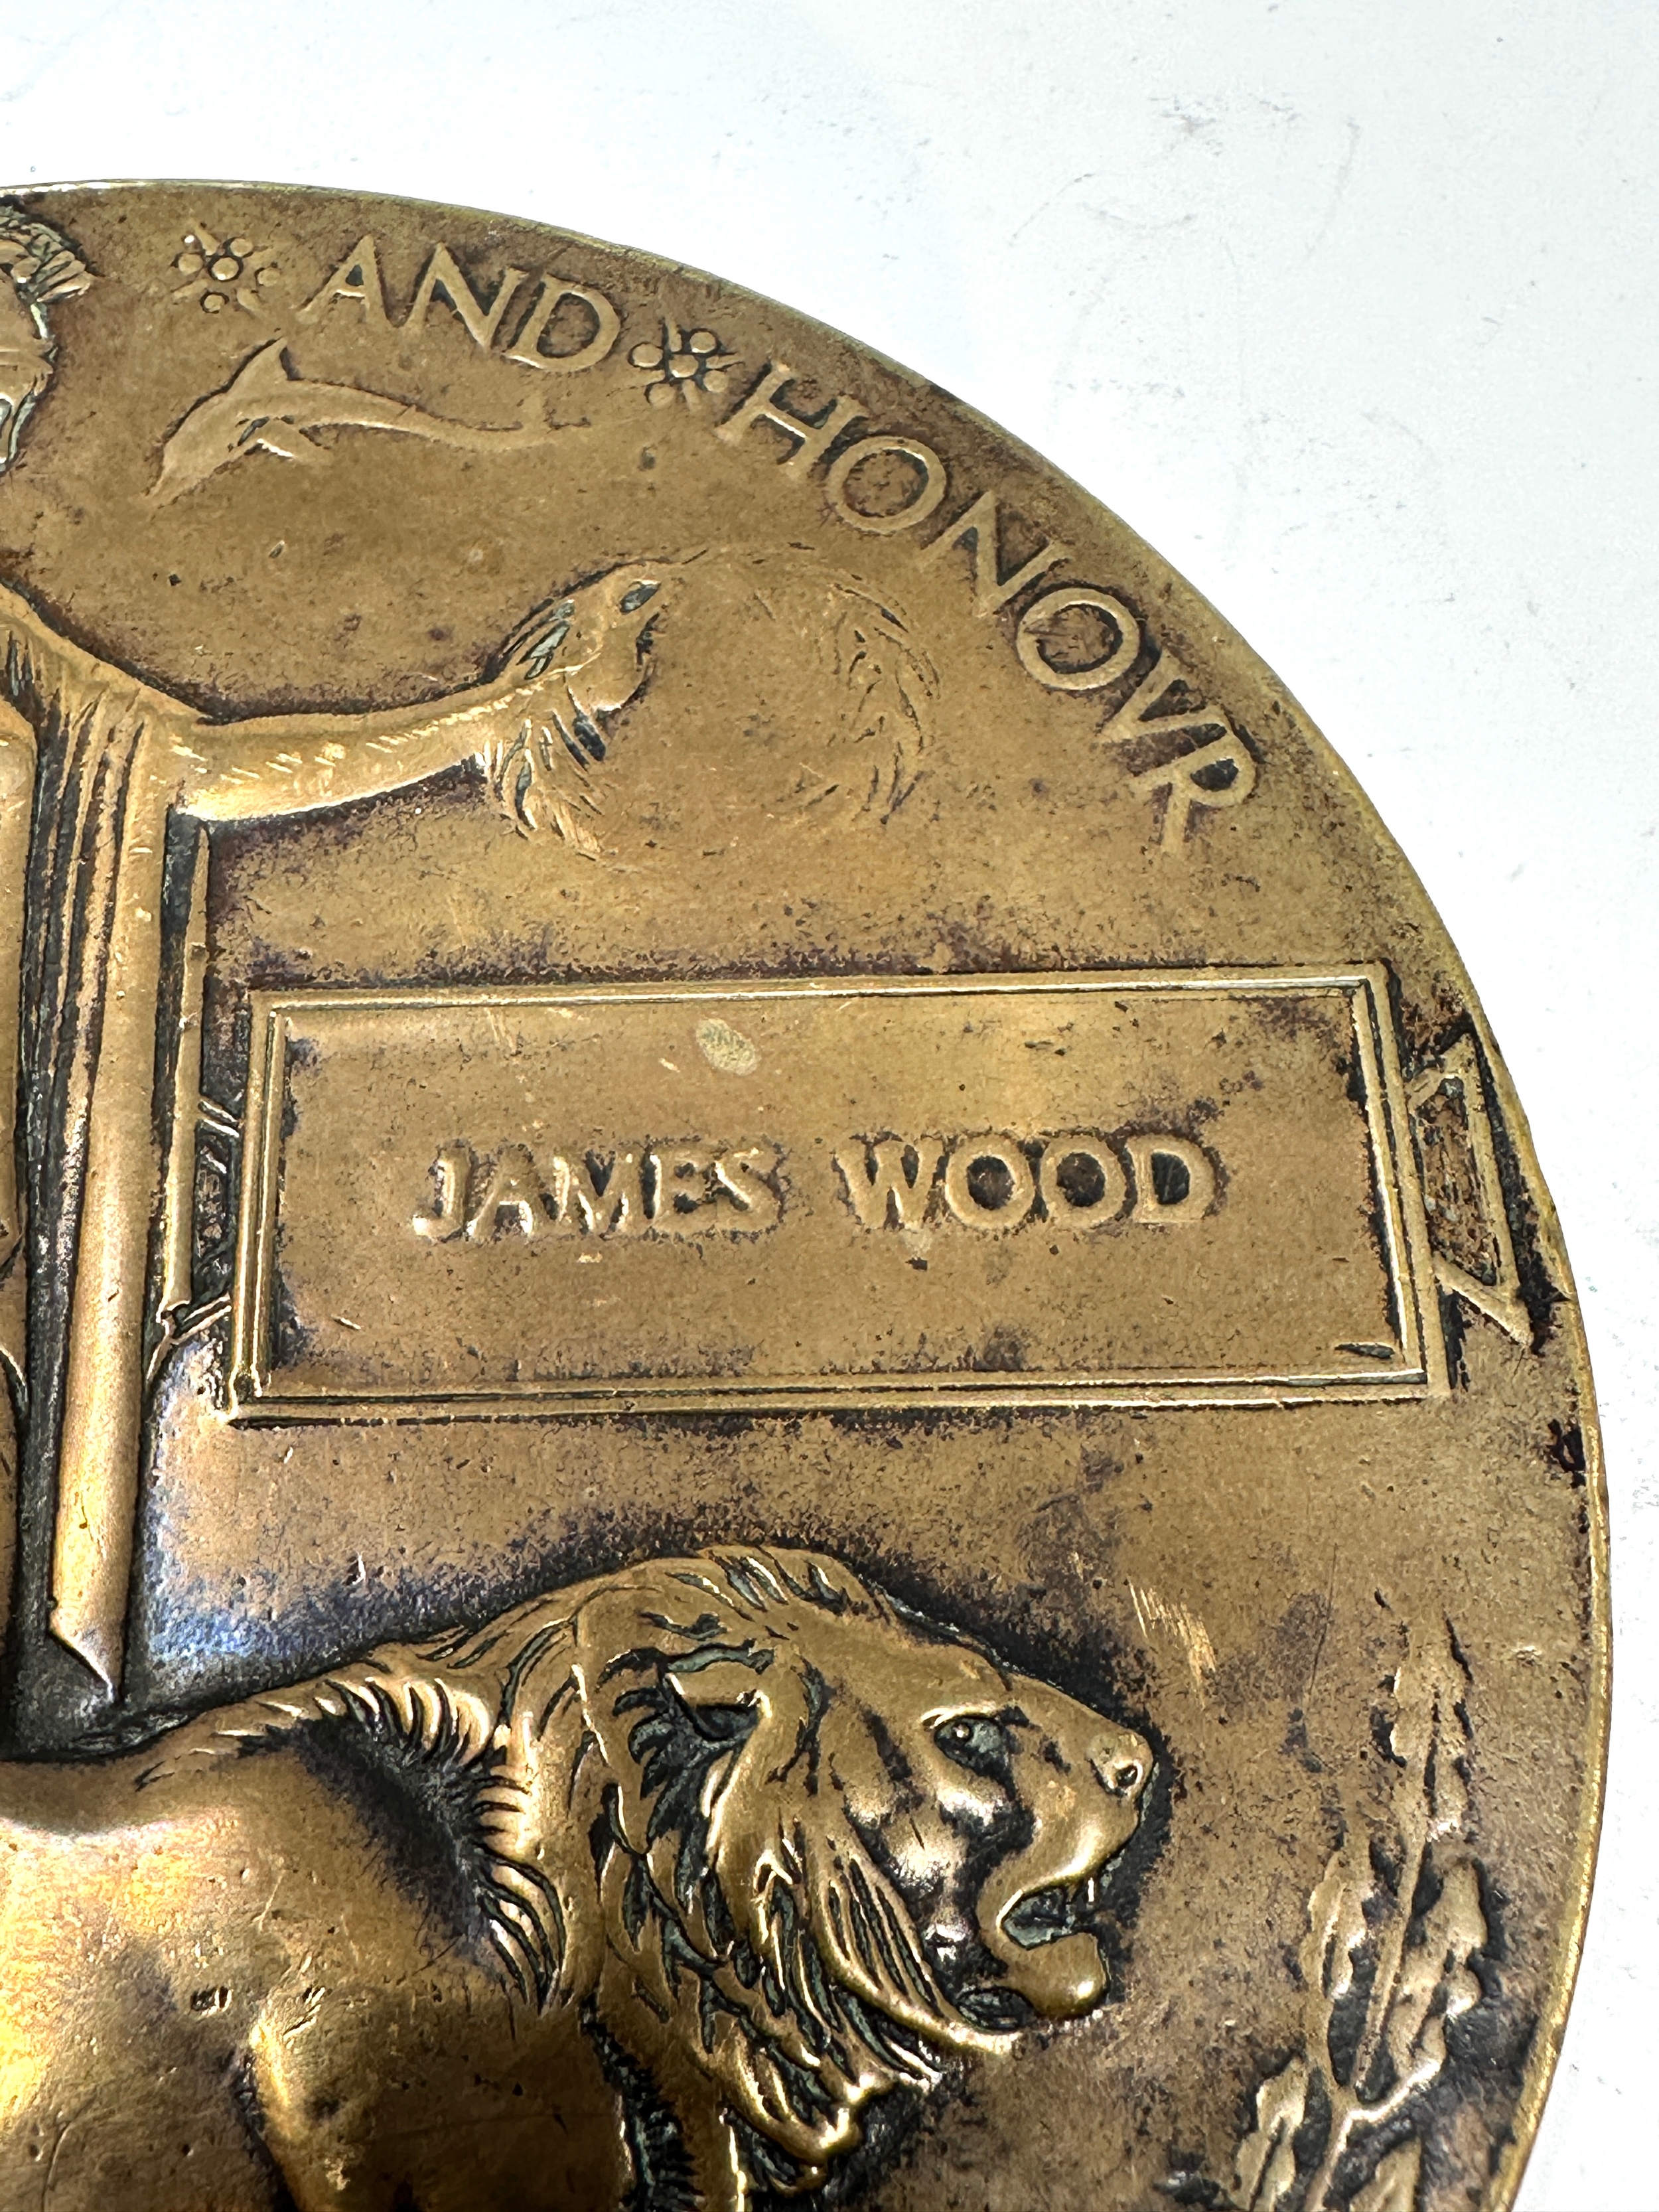 ww1 death plaque to james wood - Image 2 of 2